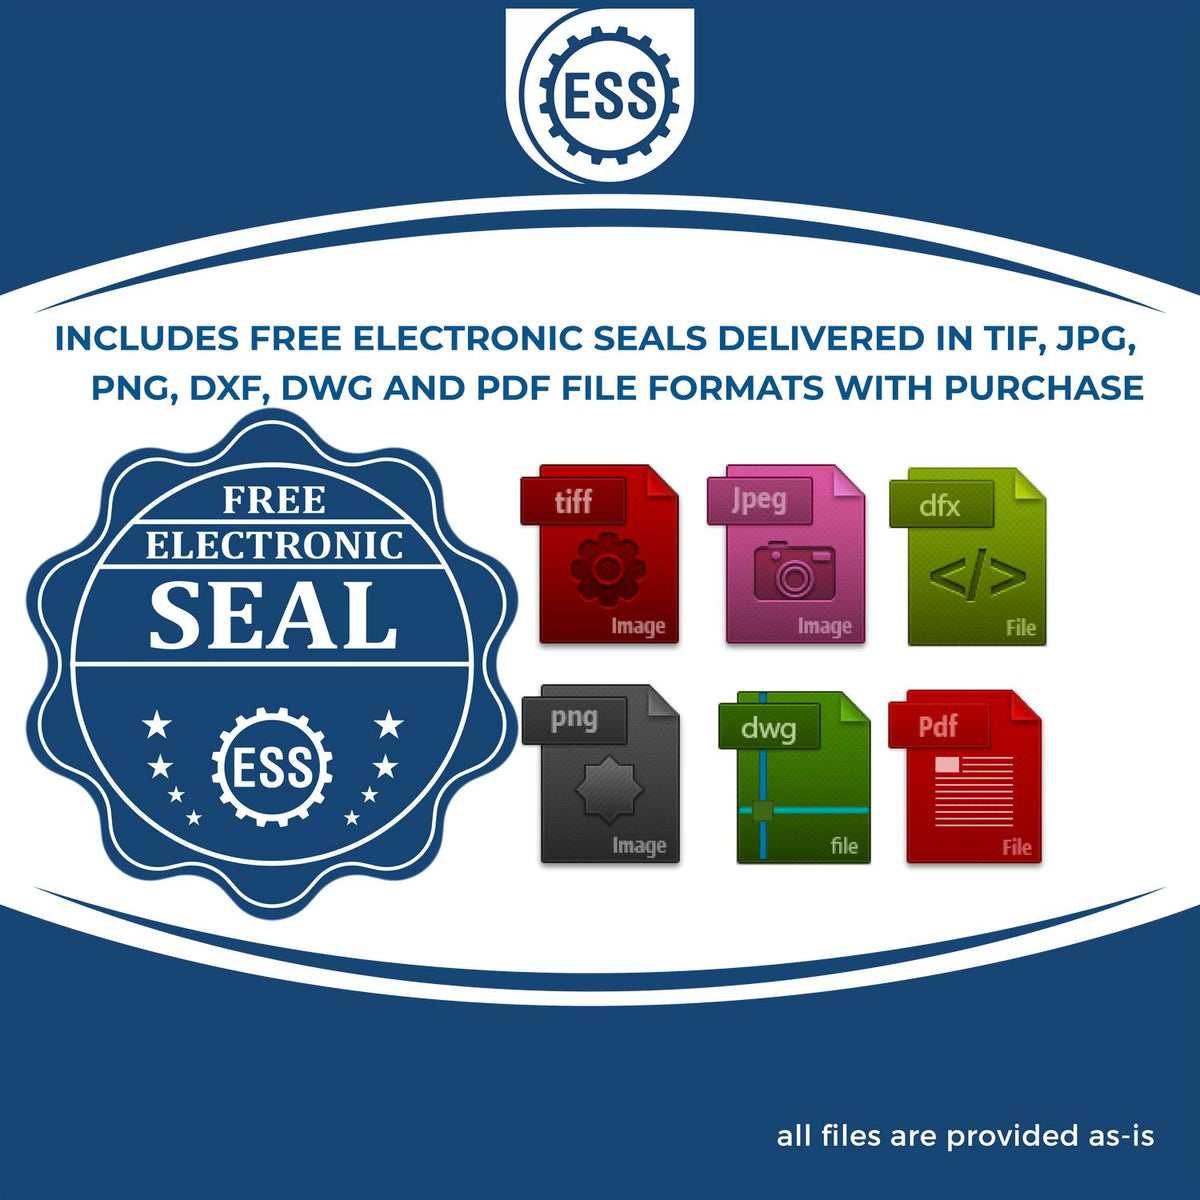 An infographic for the free electronic seal for the Gift Washington Land Surveyor Seal illustrating the different file type icons such as DXF, DWG, TIF, JPG and PNG.